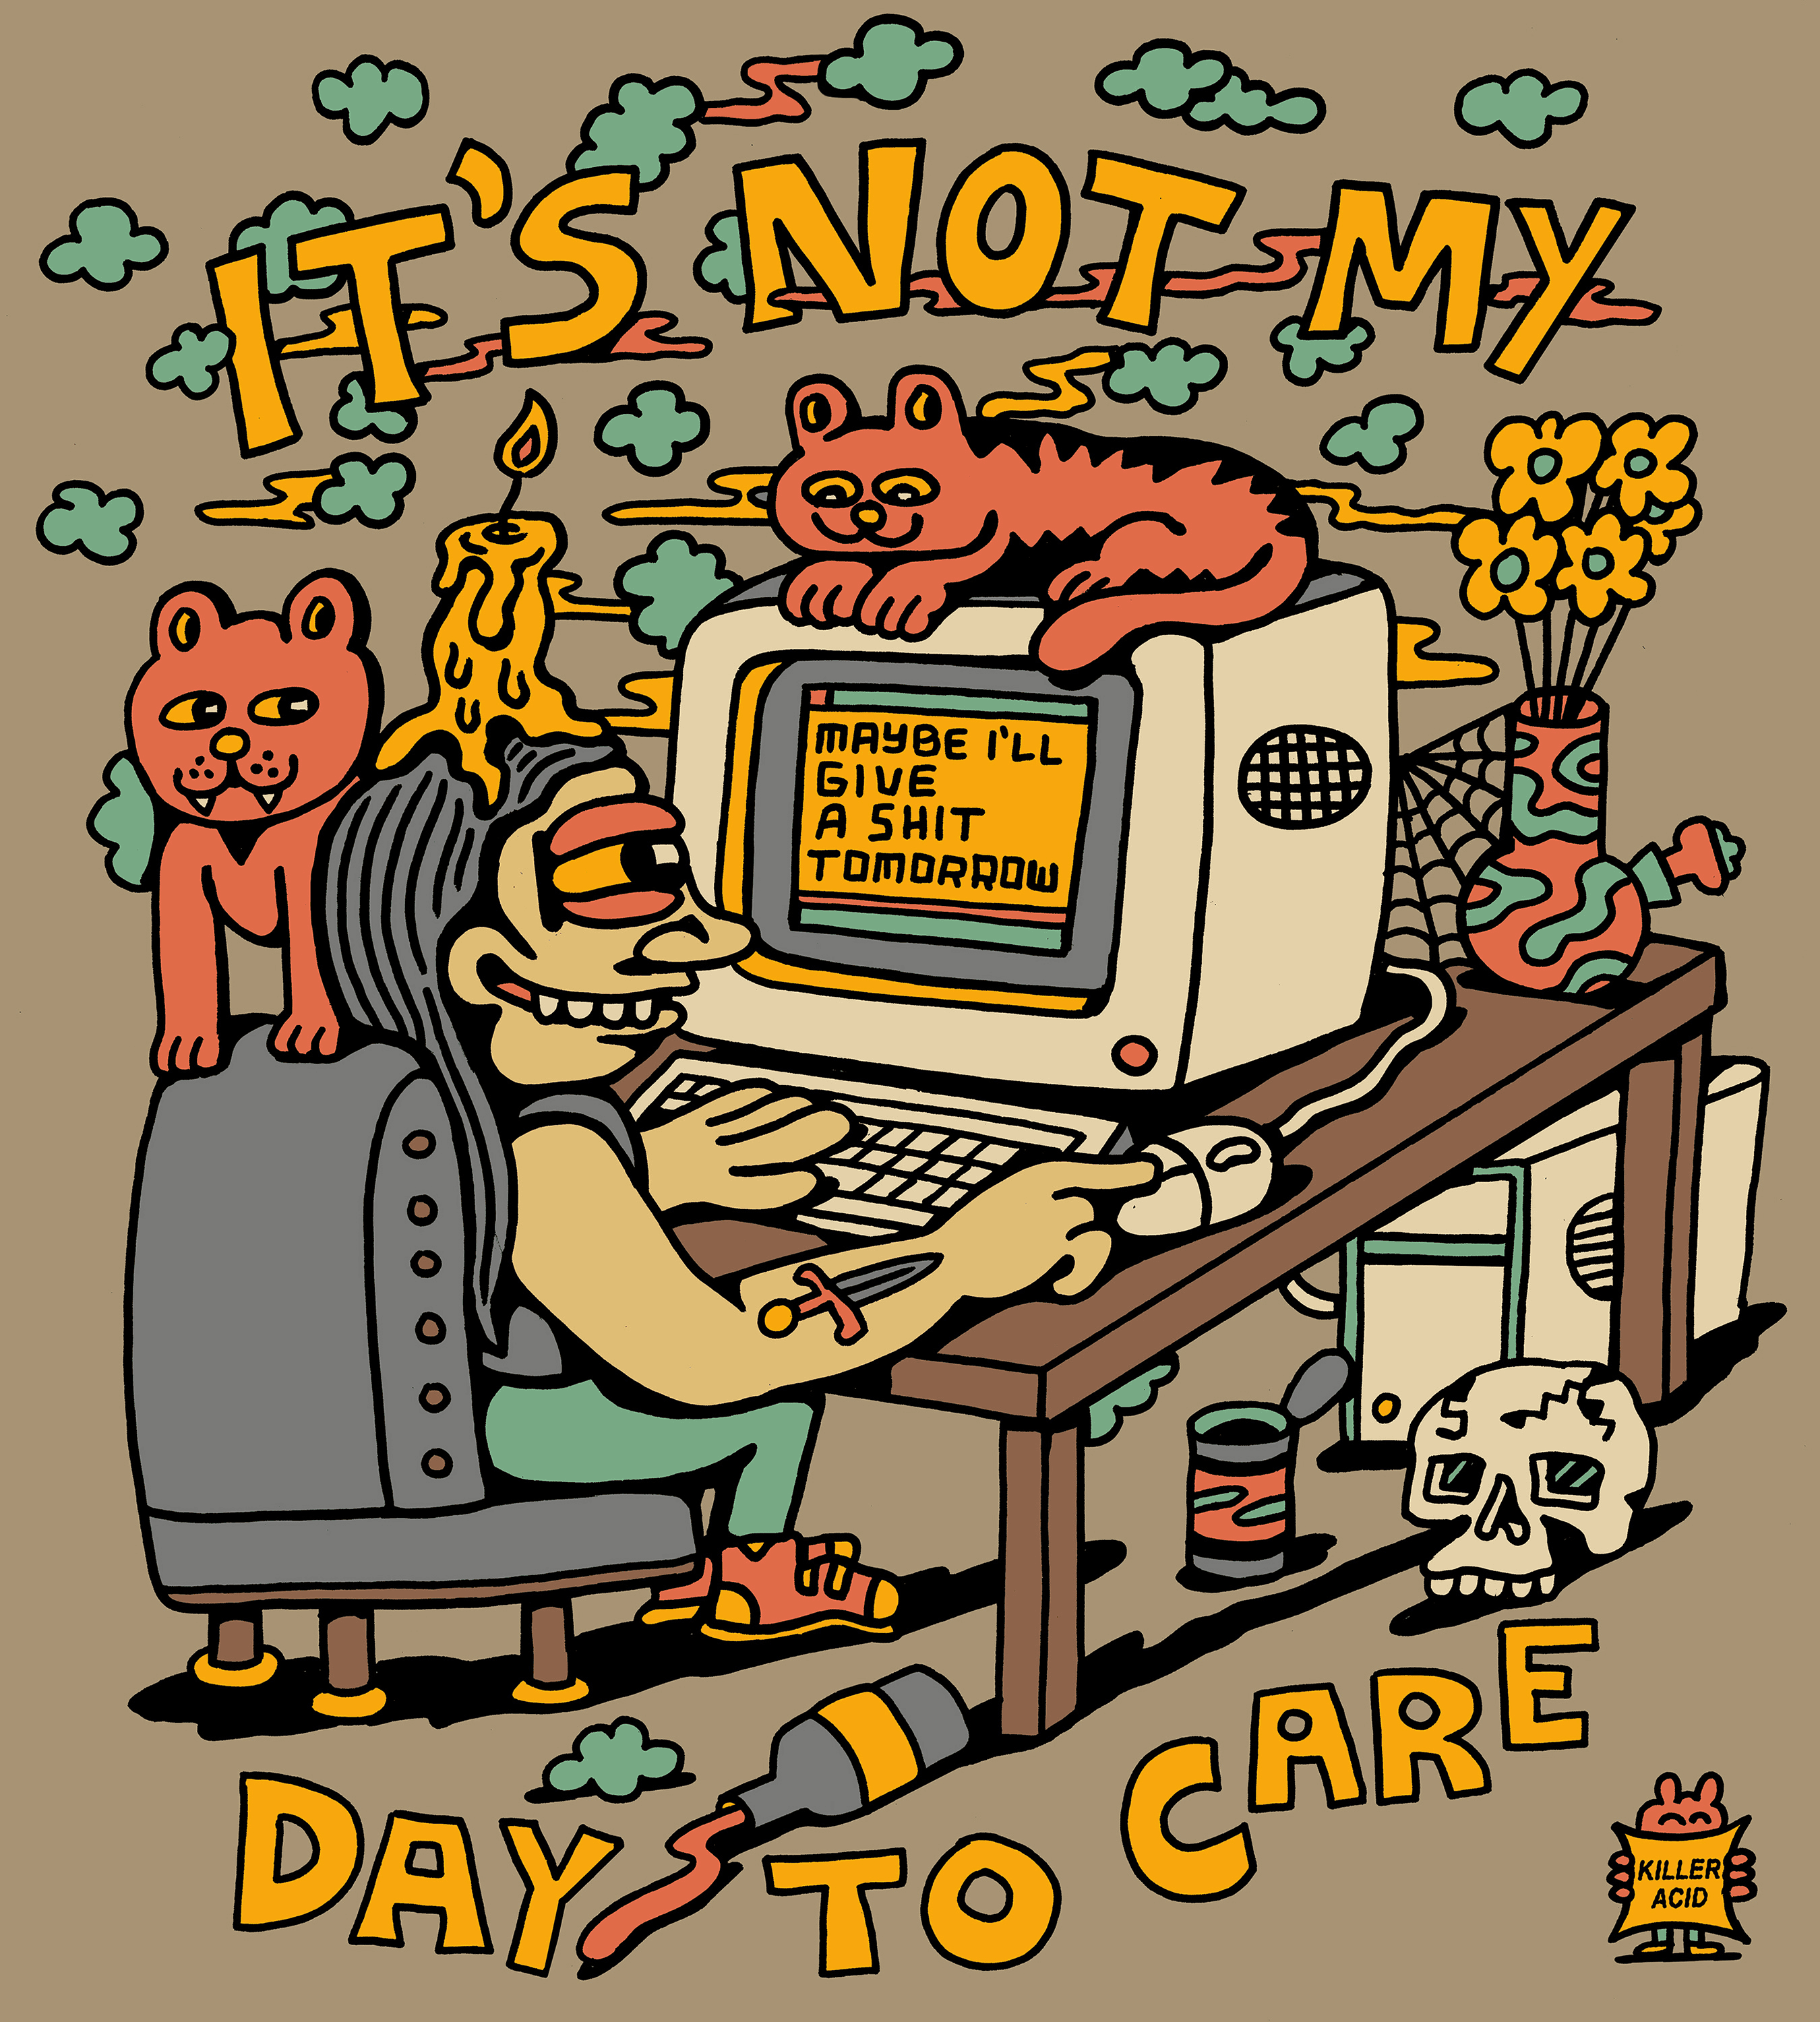 It's Not My Day To Care #9